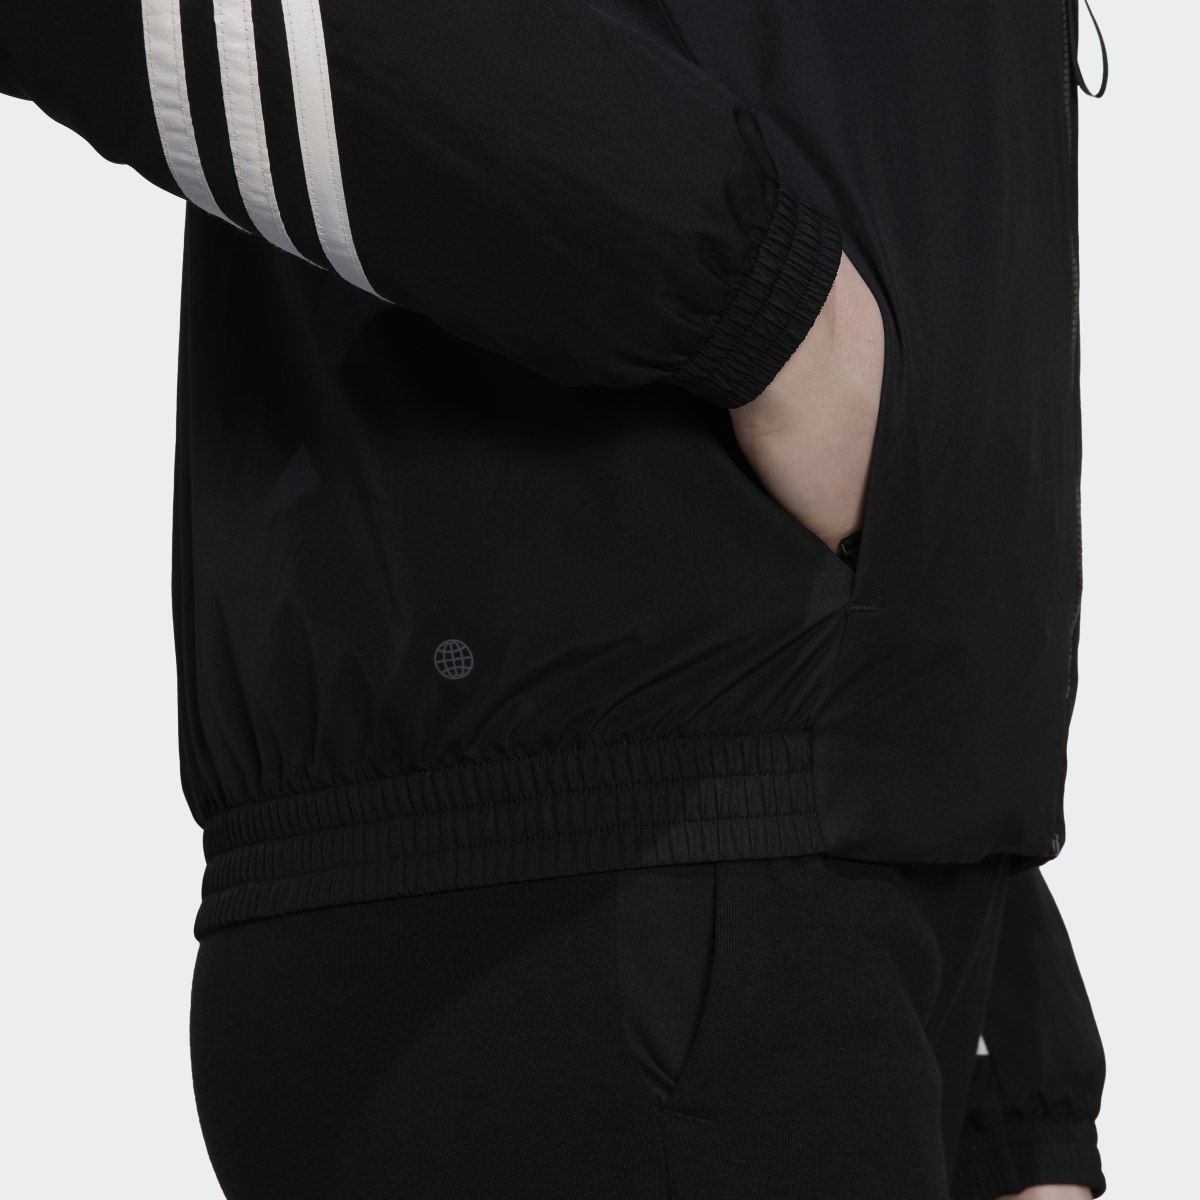 Adidas Back to Sport Hooded Jacket. 6